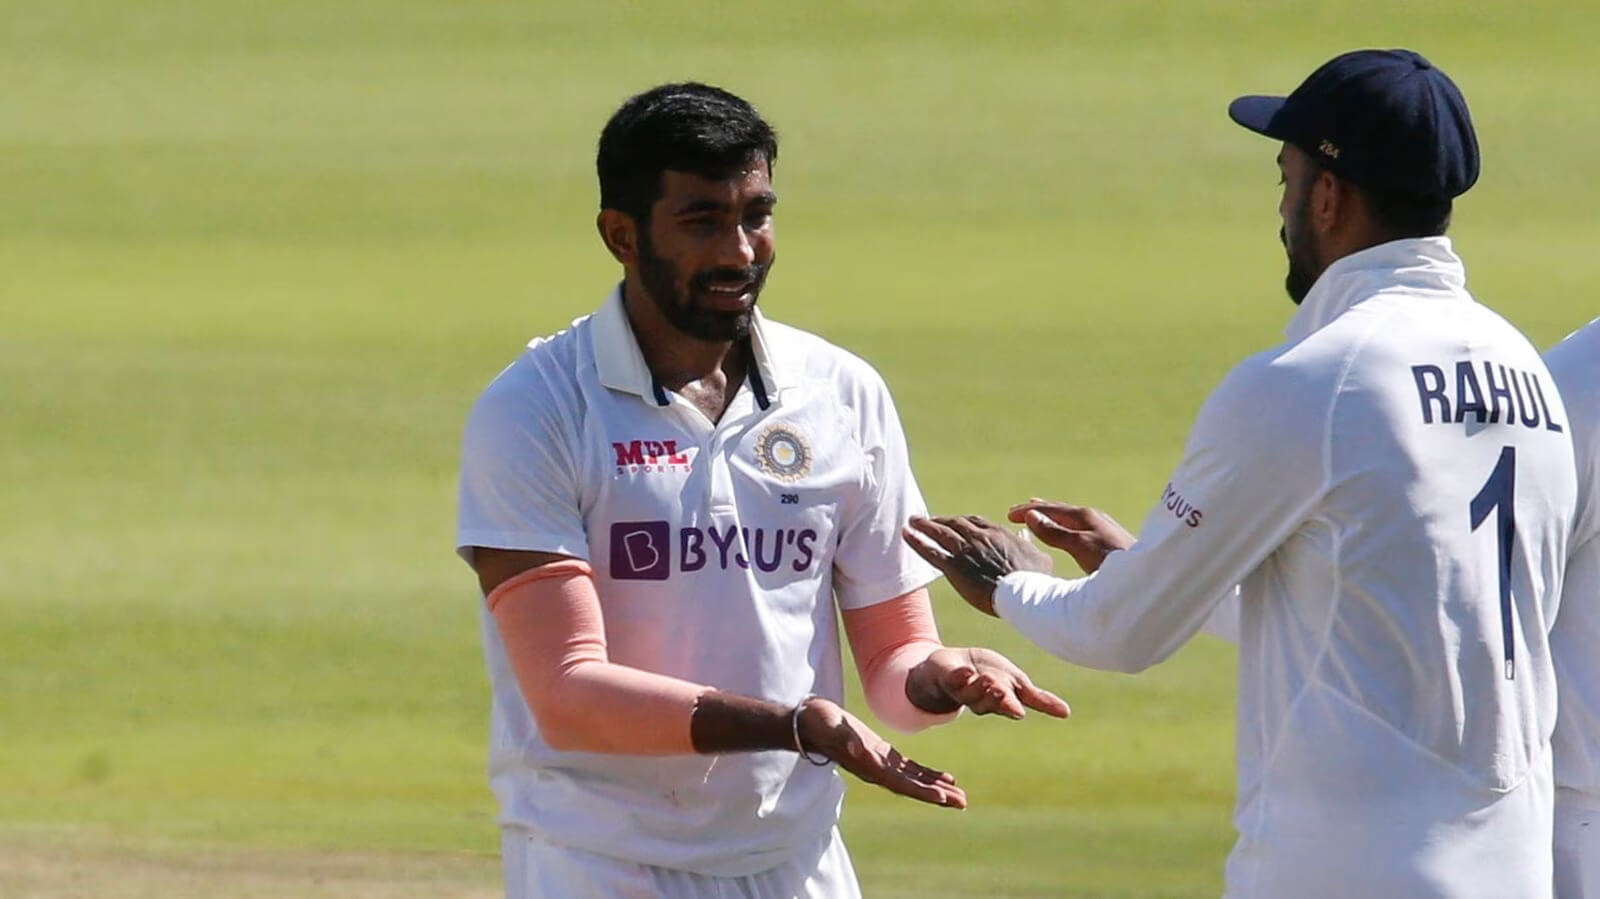 IND vs ENG - Jasprit Bumrah Likely to Return for 5th Test